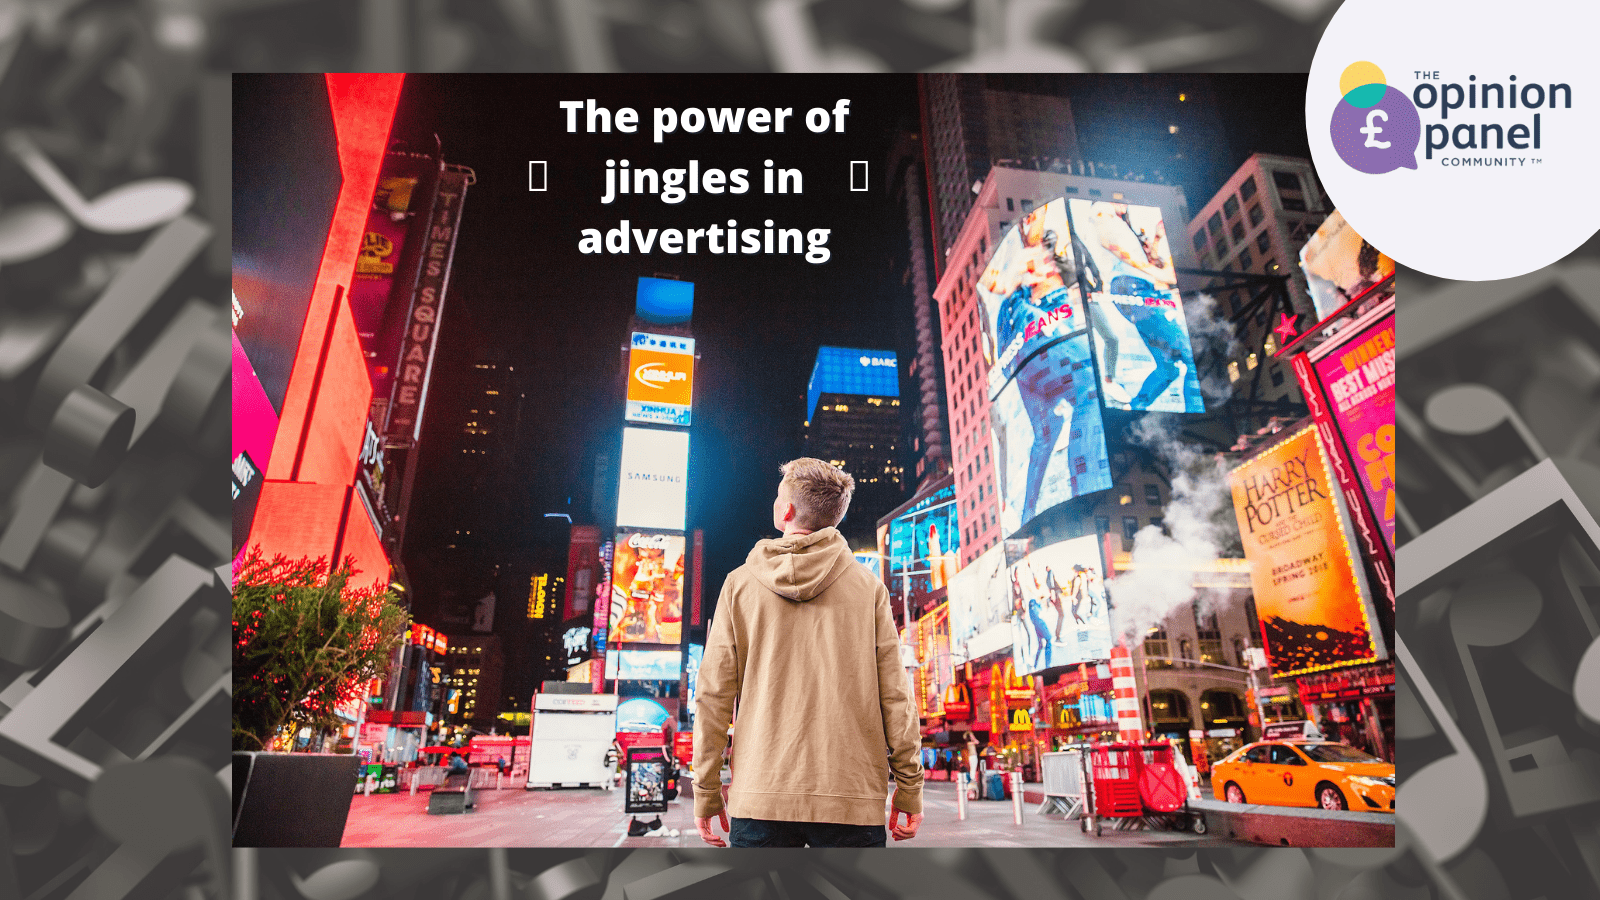 The power of 'jingles' in advertising | The OpinionPanel Community